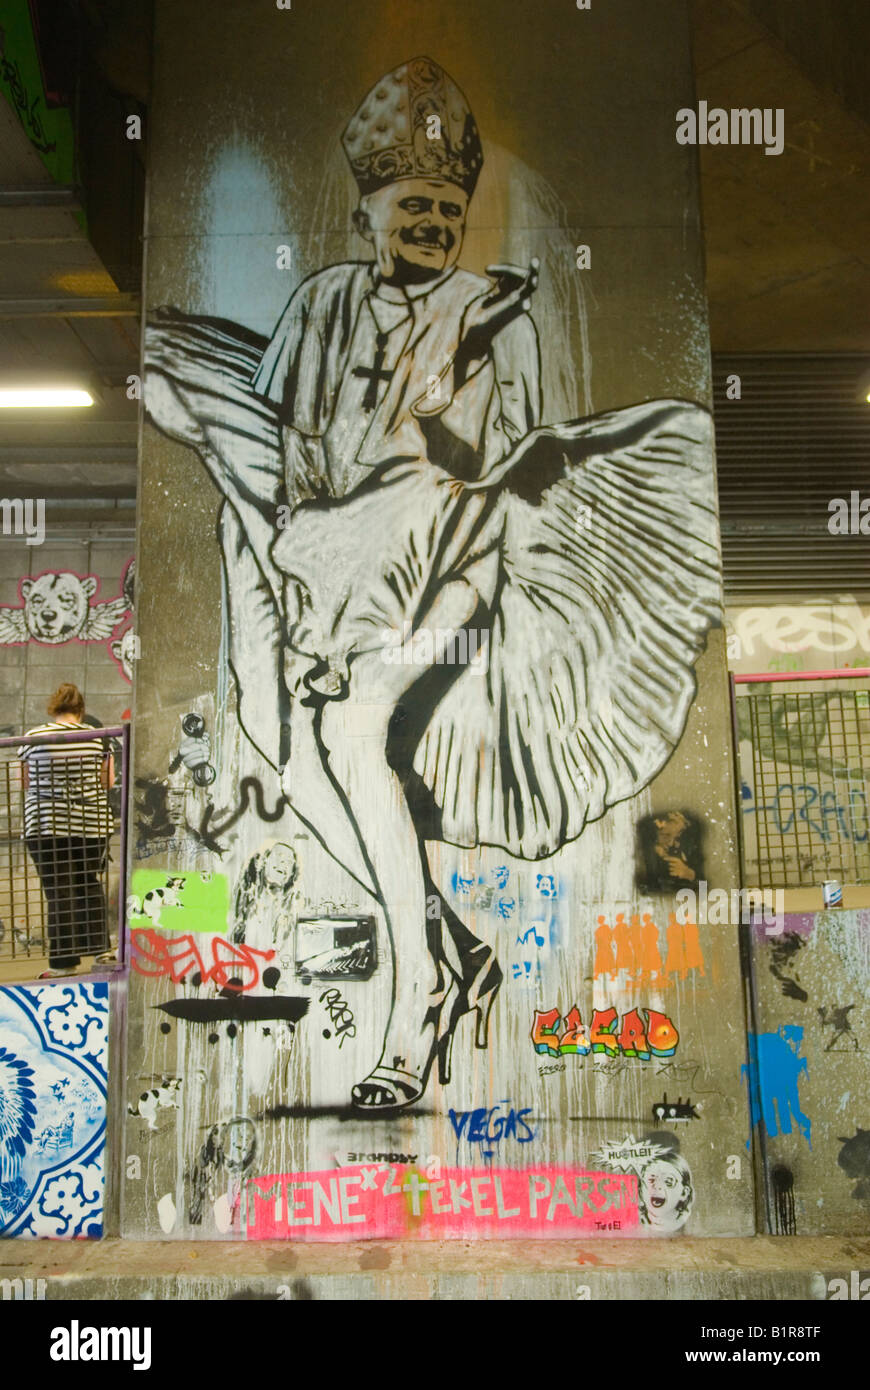 Graffiti stencil street art exhibition, image of the Pope wearing a dress and high heal shoes.  London UK 2008 2000s HOMER SYKES Stock Photo